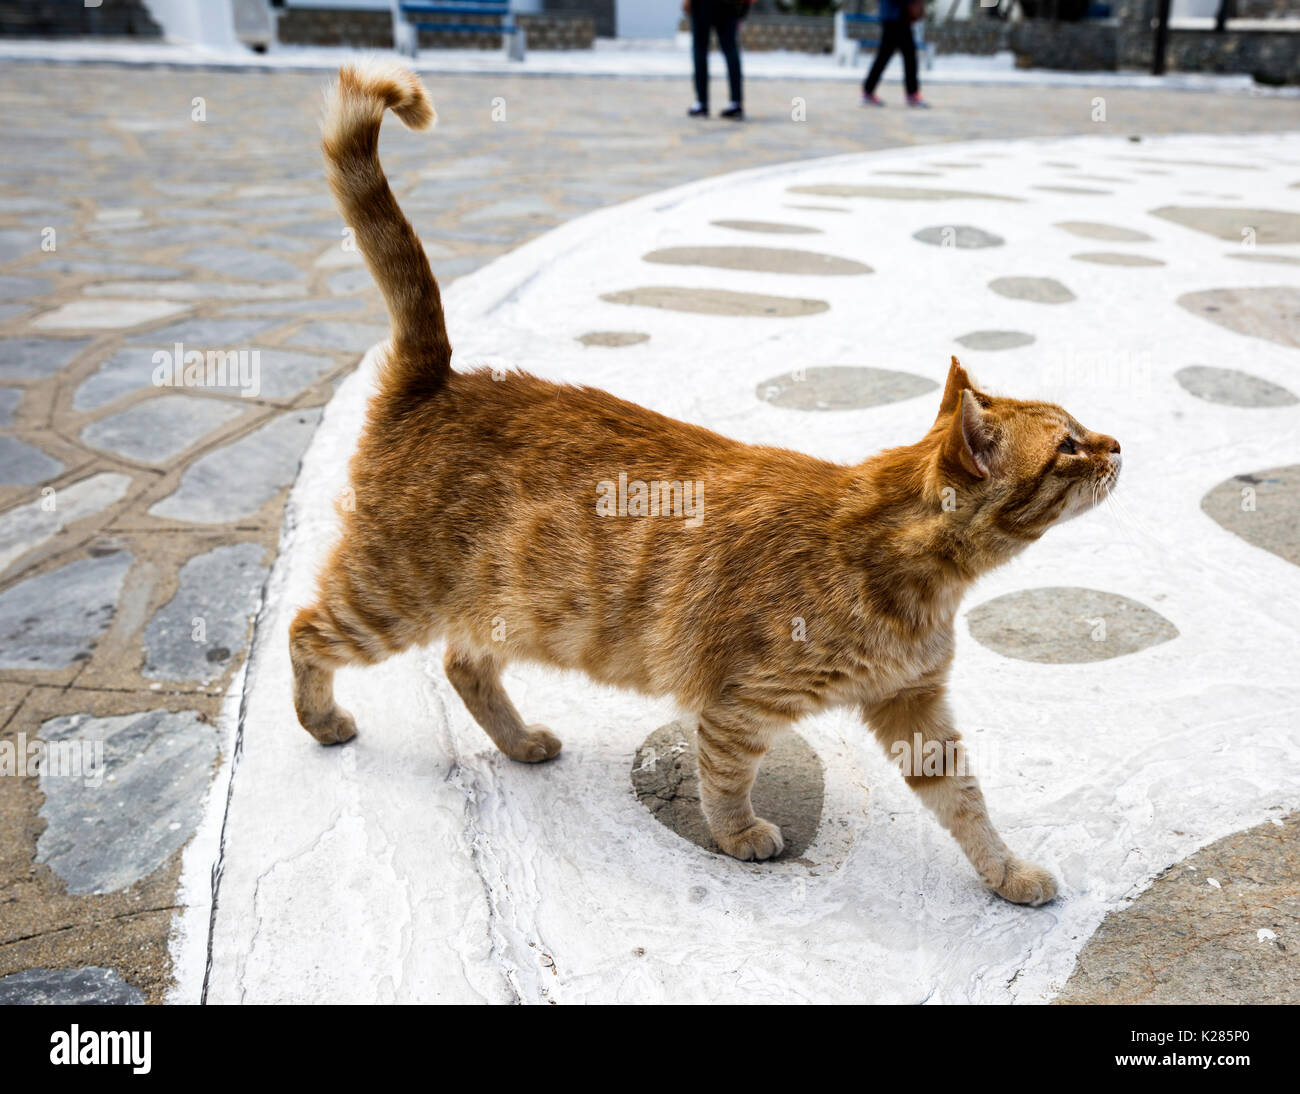 Ginger cat walking along with its tail in the air, Ano Mera, Mykonos, Greece. Stock Photo